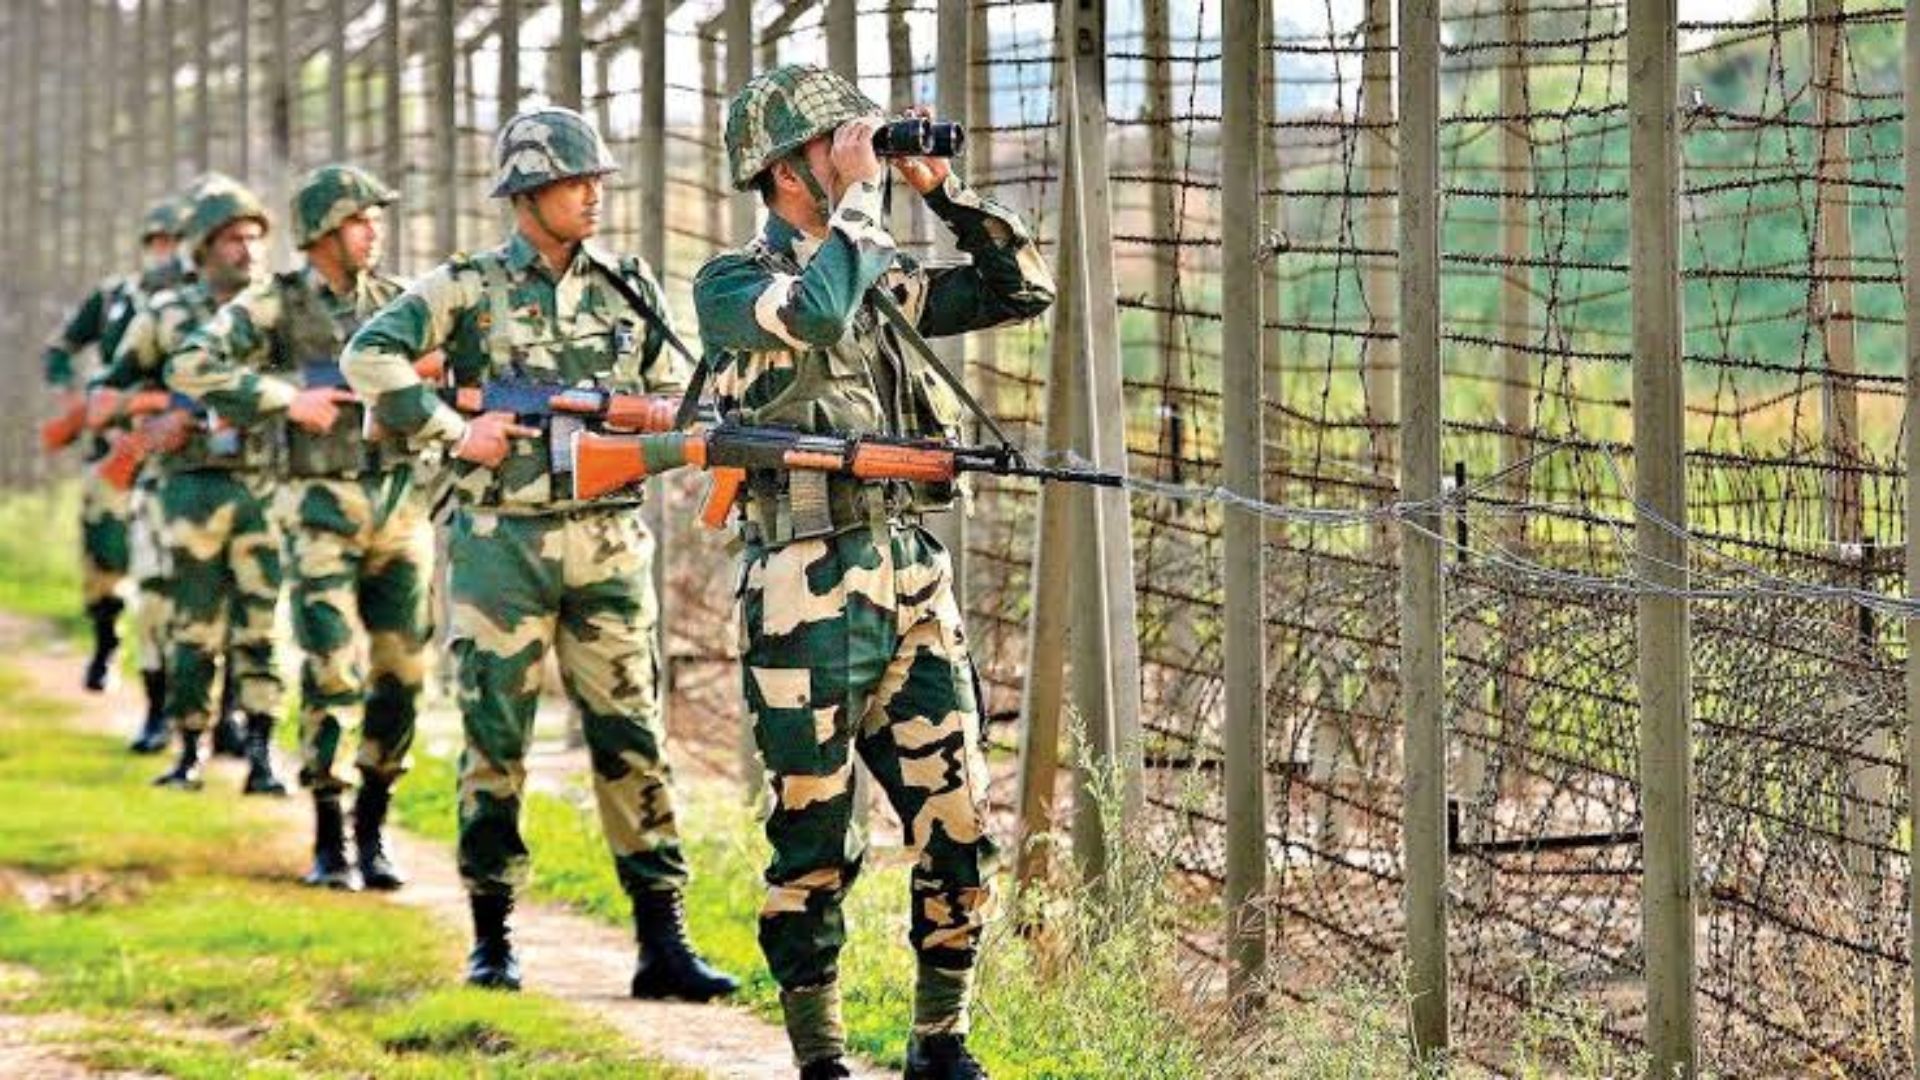 Maximum number of BSF employees choosing voluntary retirement, followed by CRPF employees: Govt